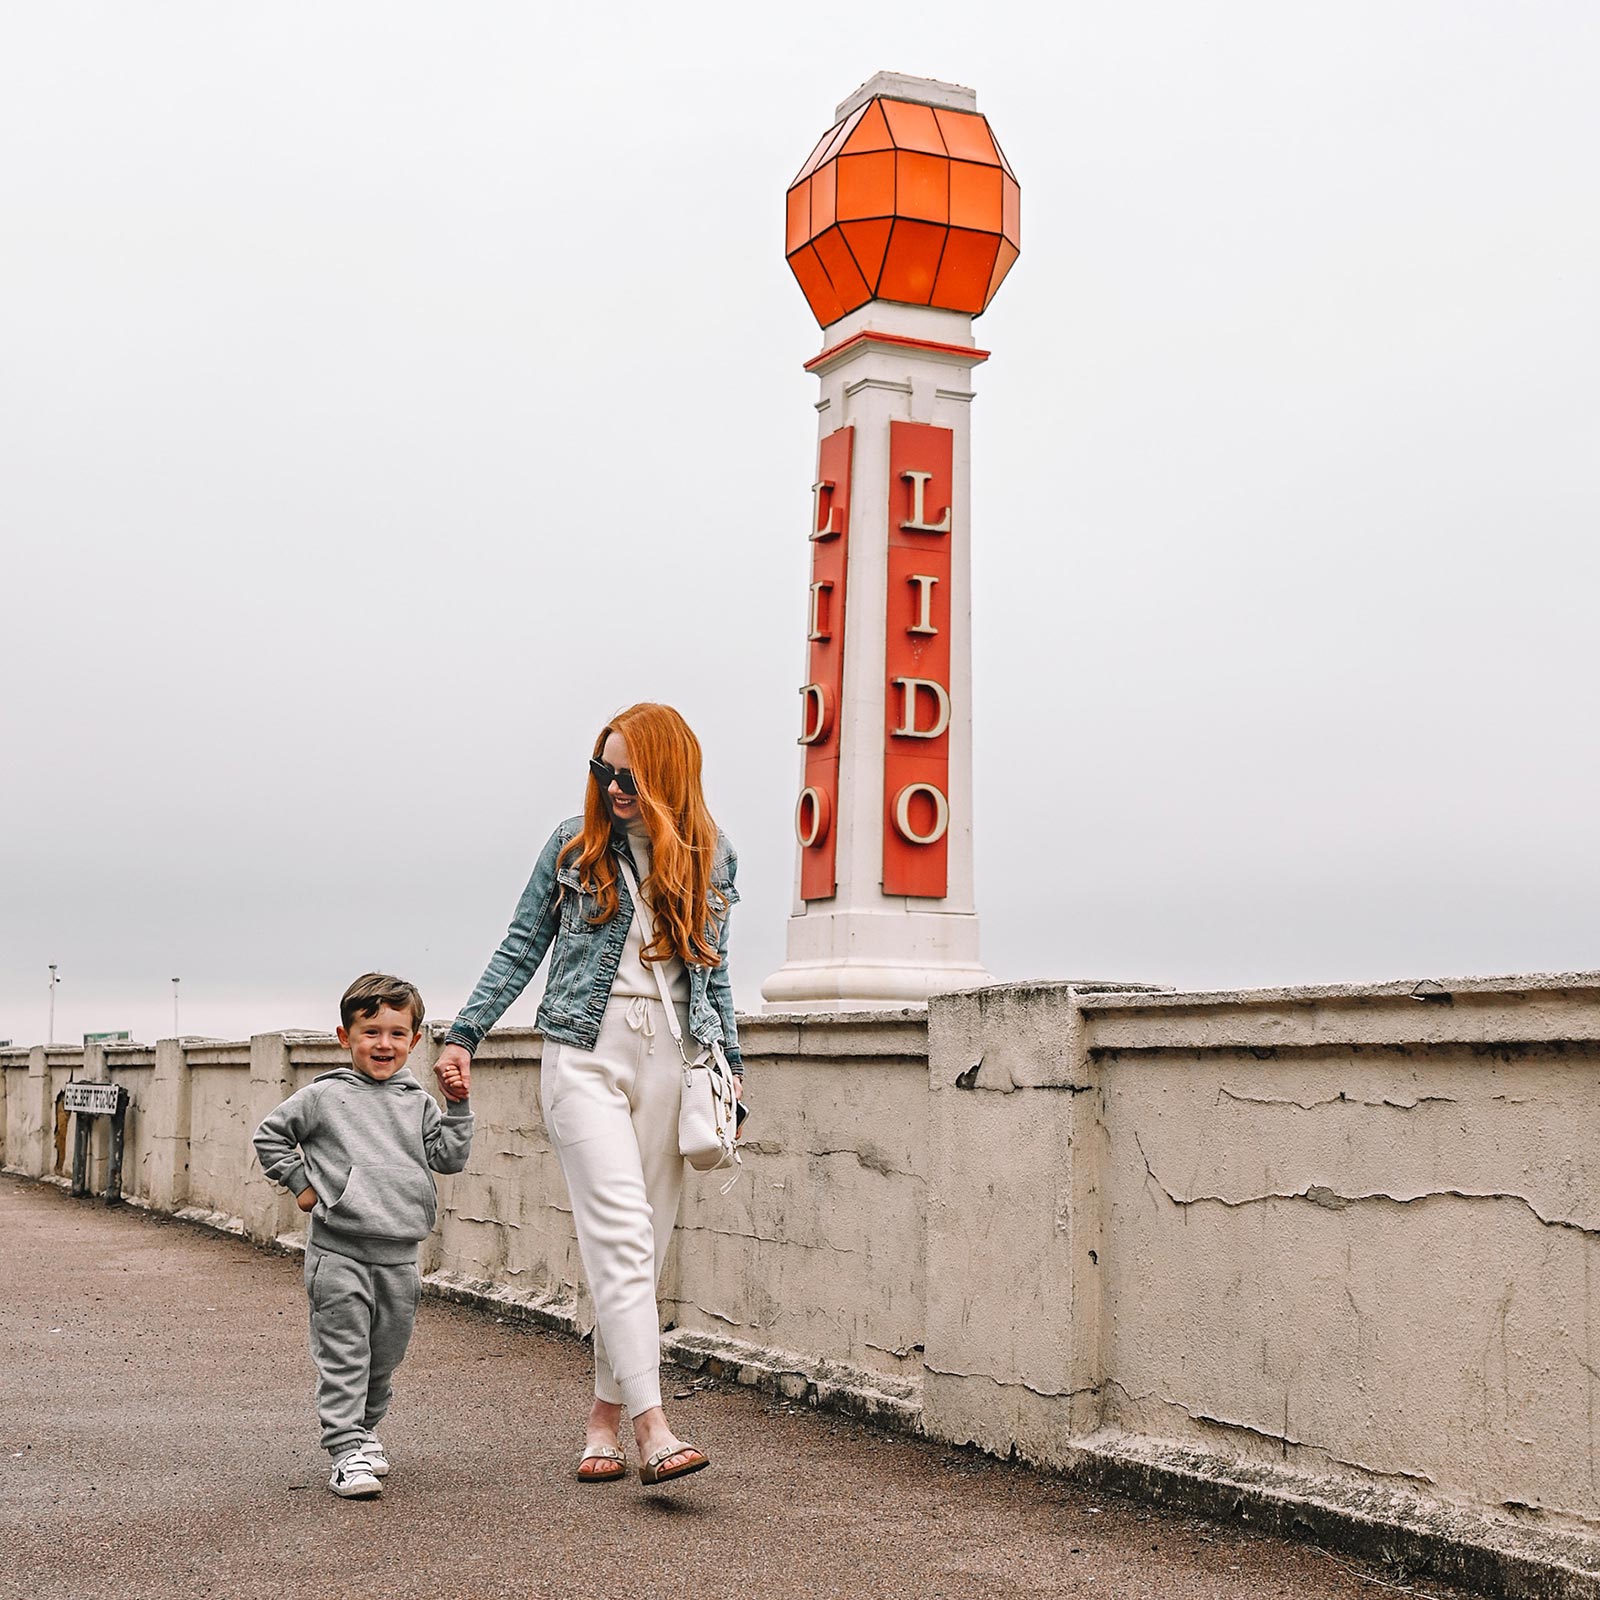 Amber and Max walking past the lido sign at Margate, Kent